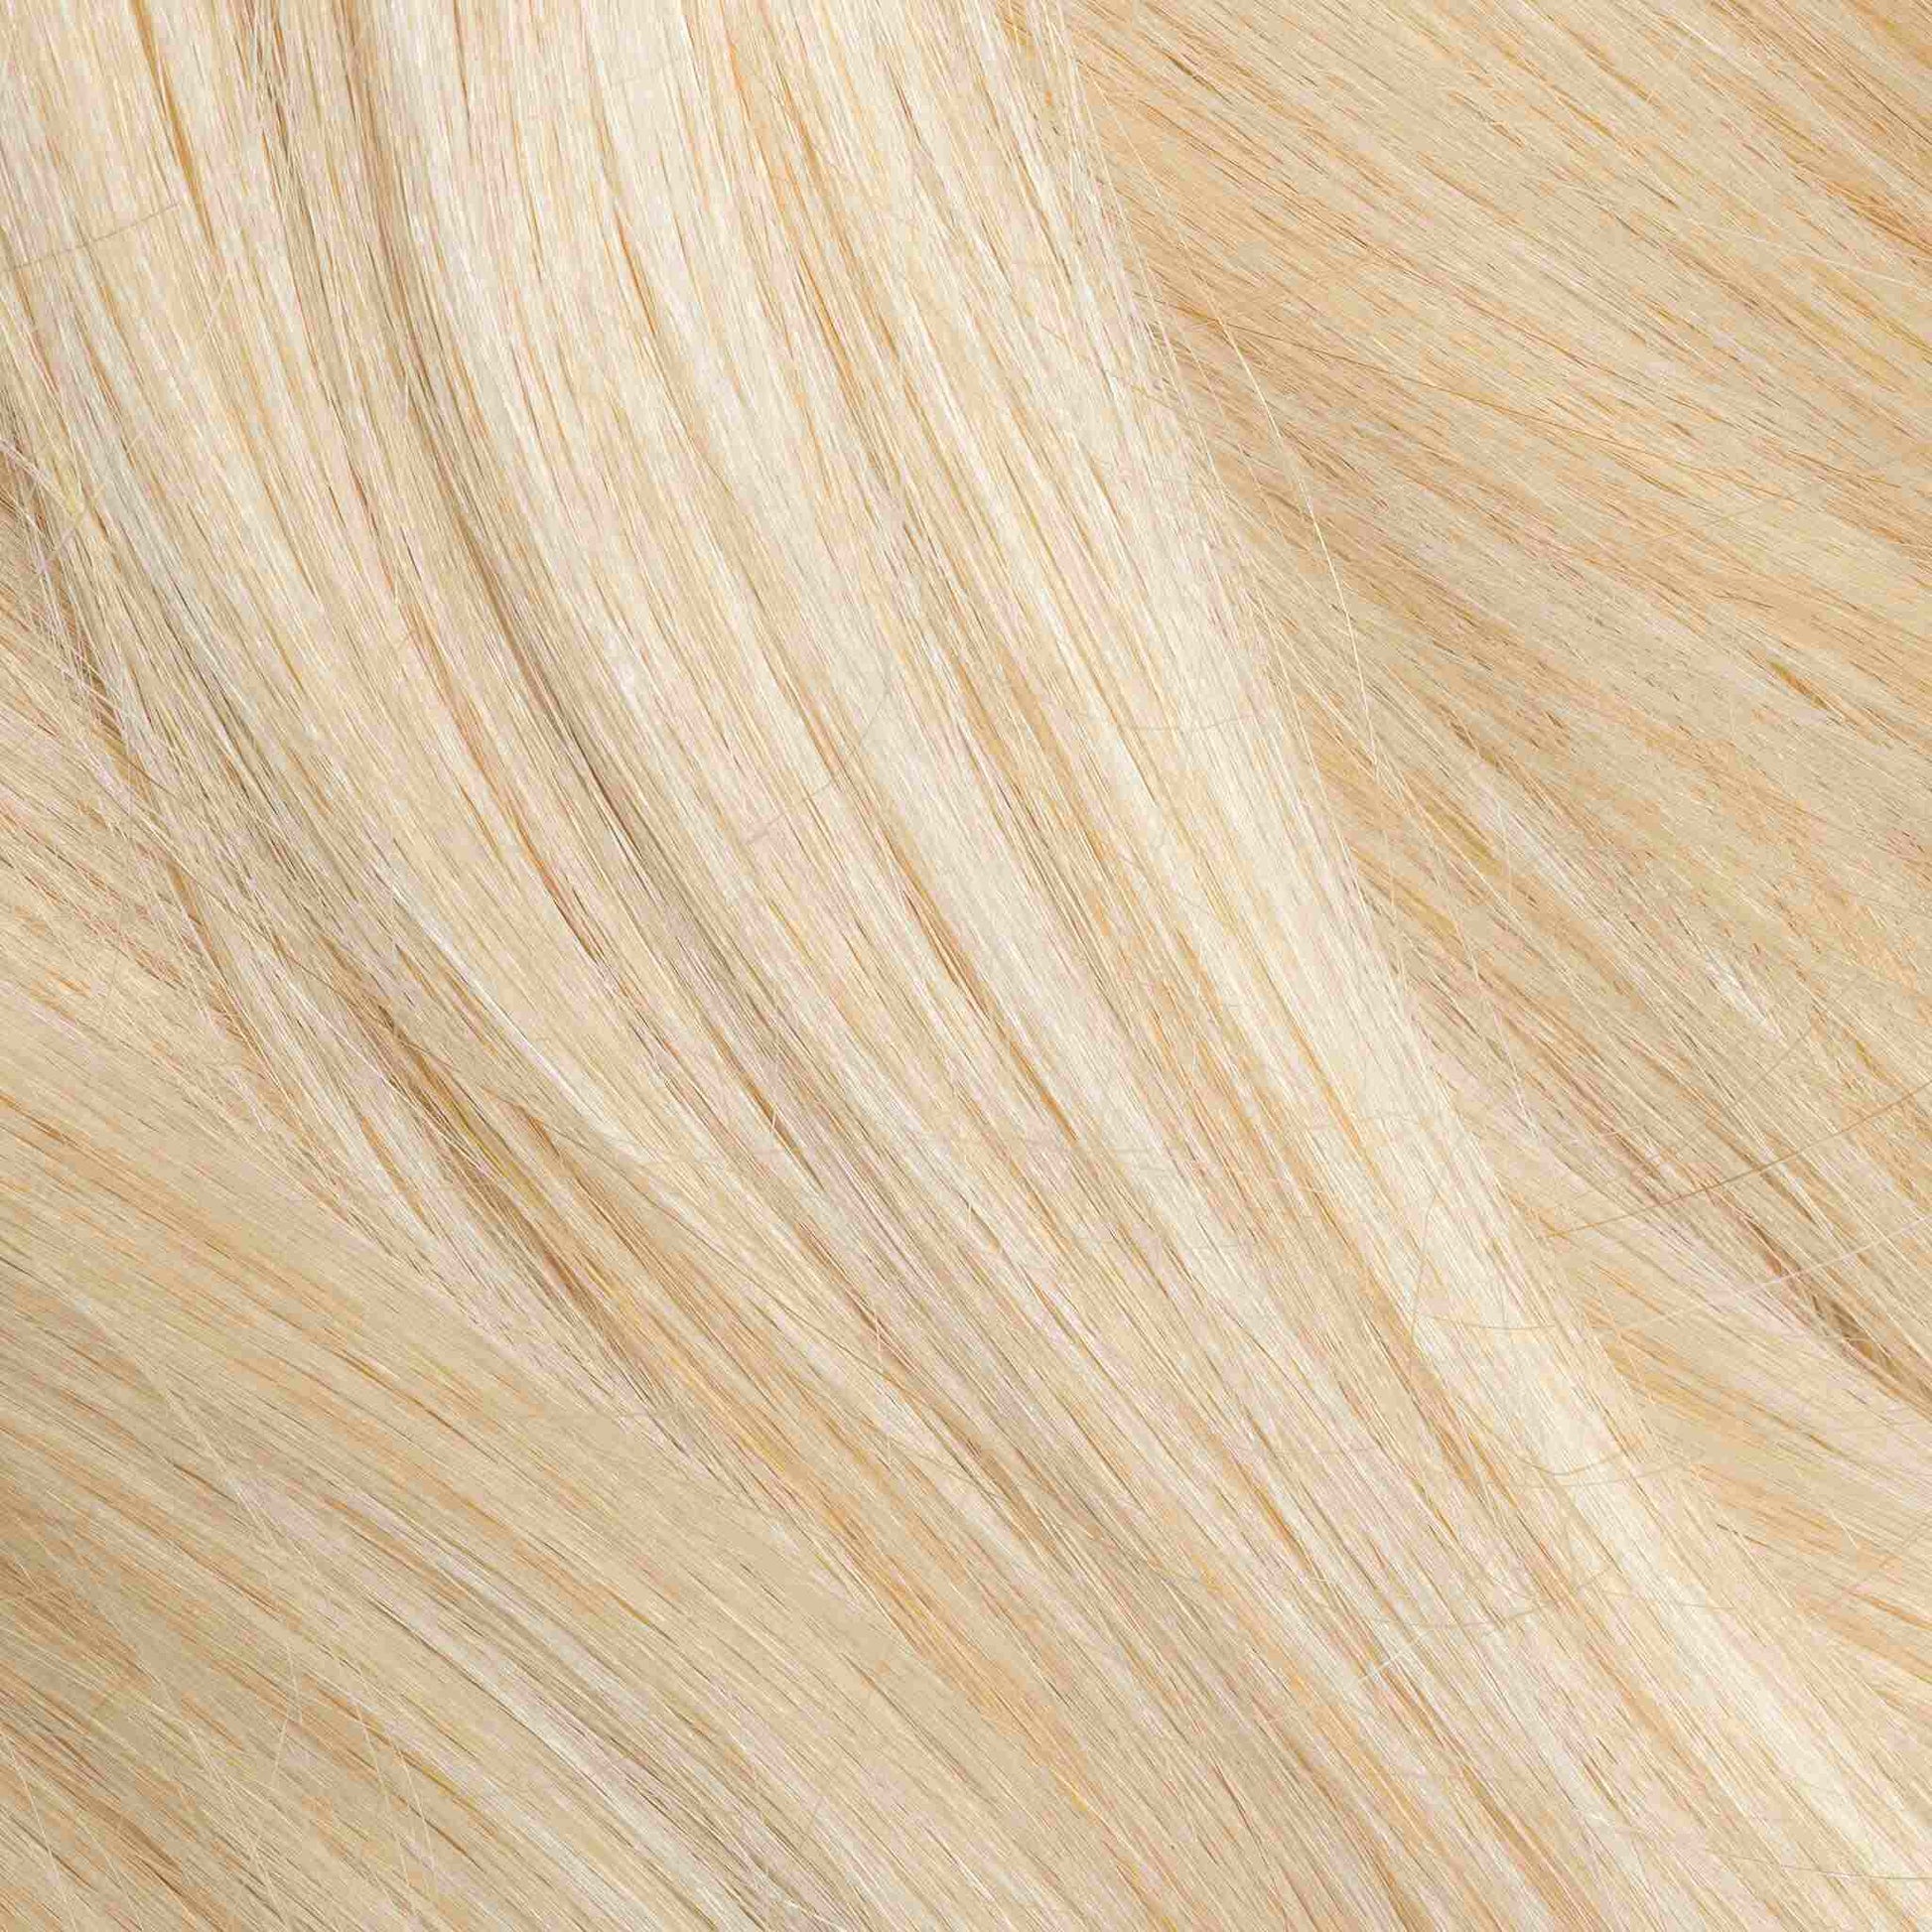 I-Tip 20" 25g Professional Hair Extensions - Ash Blonde #60